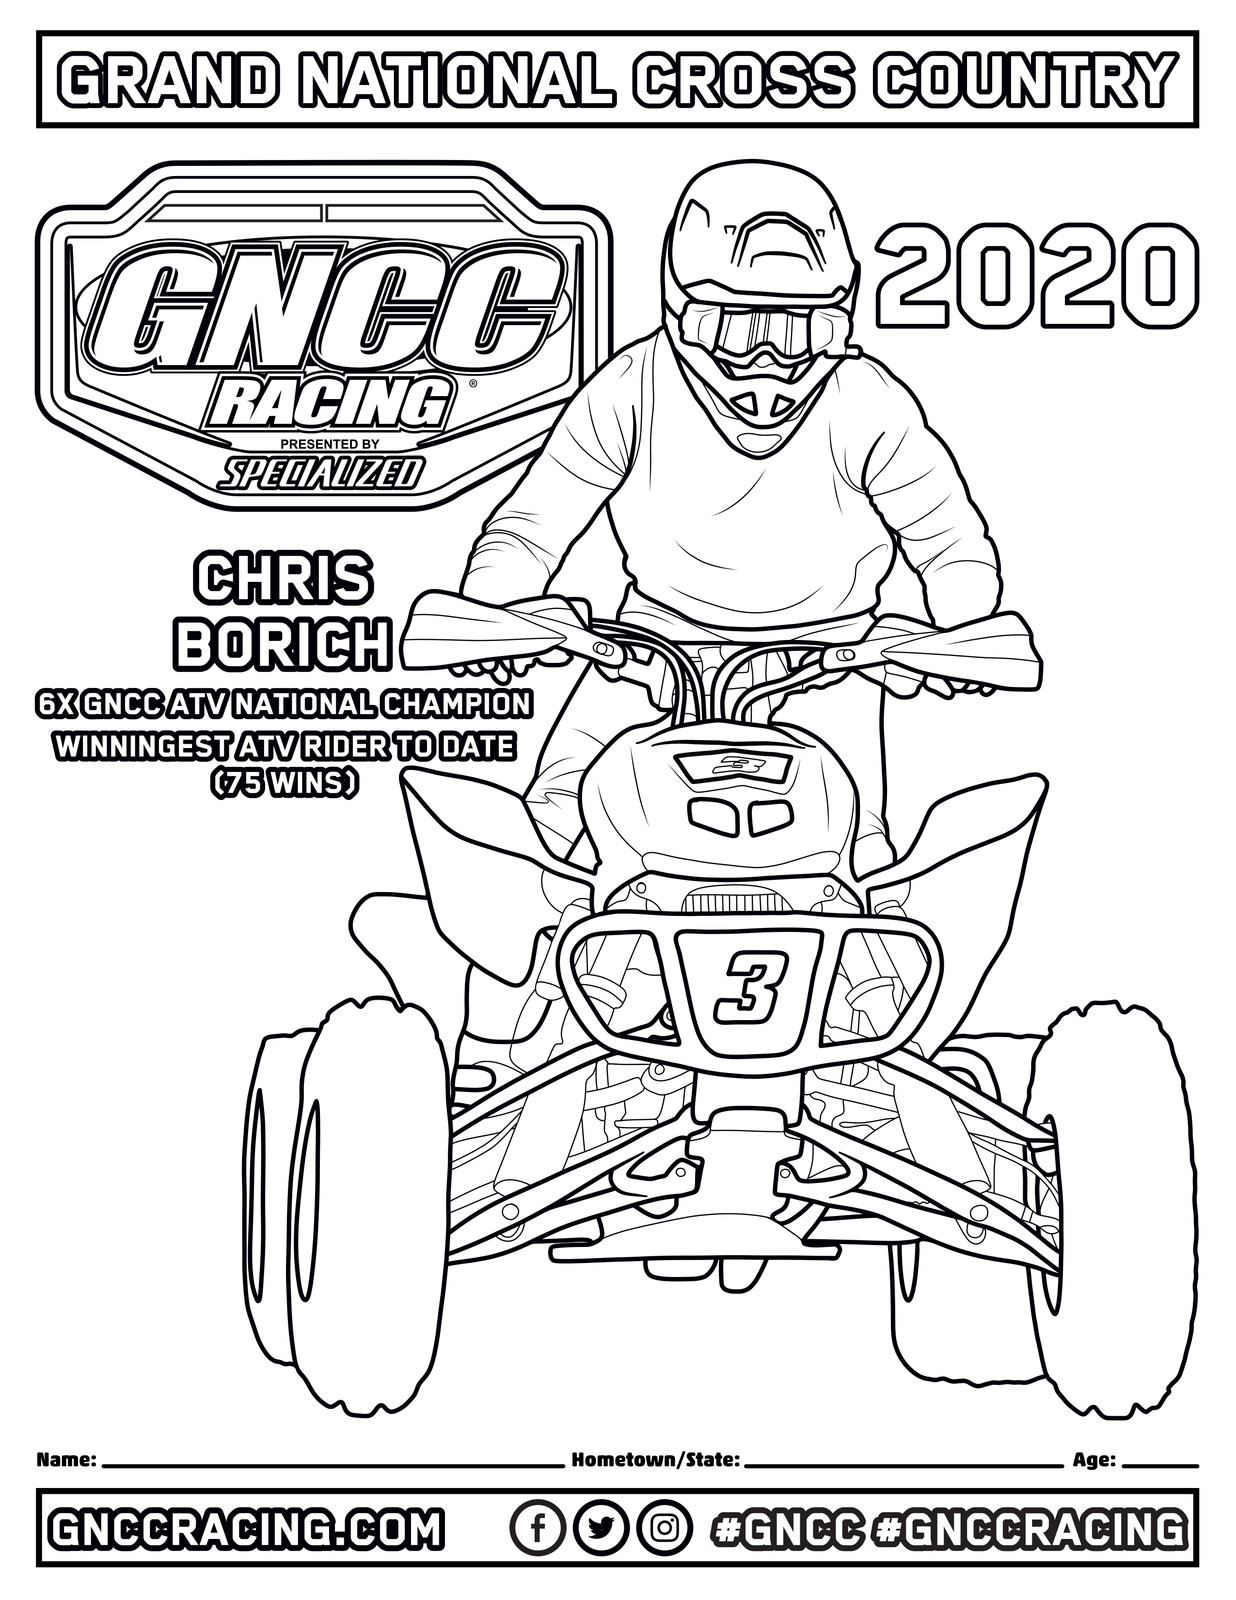 Fresh GNCC Coloring Pages For Your Kids - GNCC Racing ...